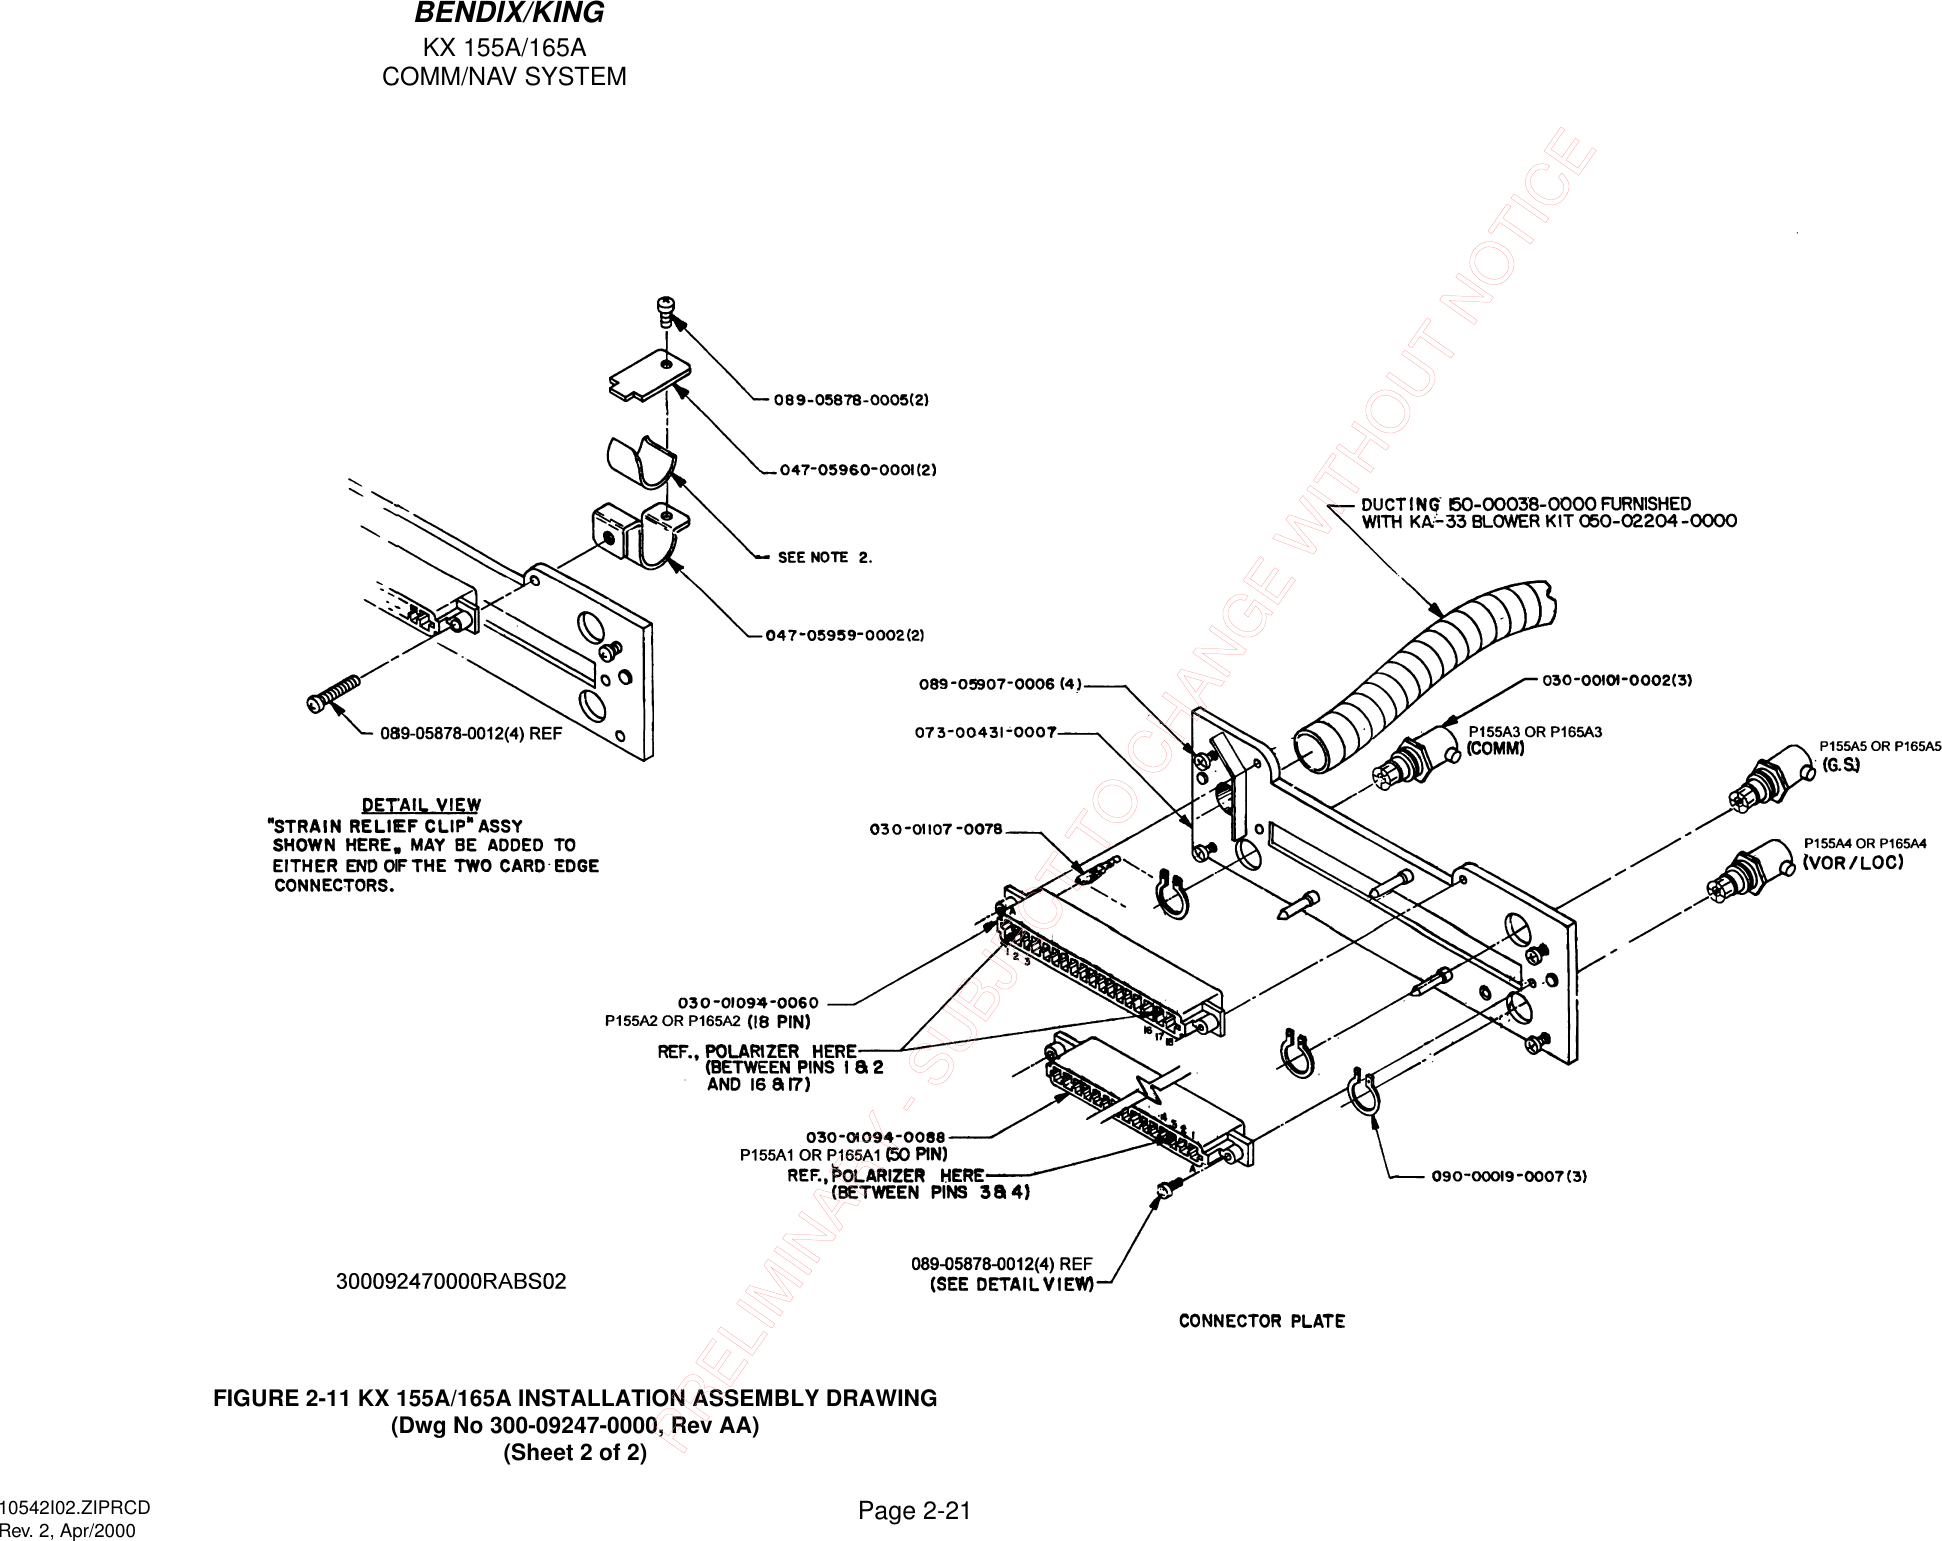 KX 155A/165ACOMM/NAV SYSTEMPage 2-21BENDIX/KING10542I02.ZIPRCDRev. 2, Apr/2000FIGURE 2-11 KX 155A/165A INSTALLATION ASSEMBLY DRAWING(Dwg No 300-09247-0000, Rev AA)(Sheet 2 of 2)PRELIMINARY - SUBJECT TO CHANGE WITHOUT NOTICE